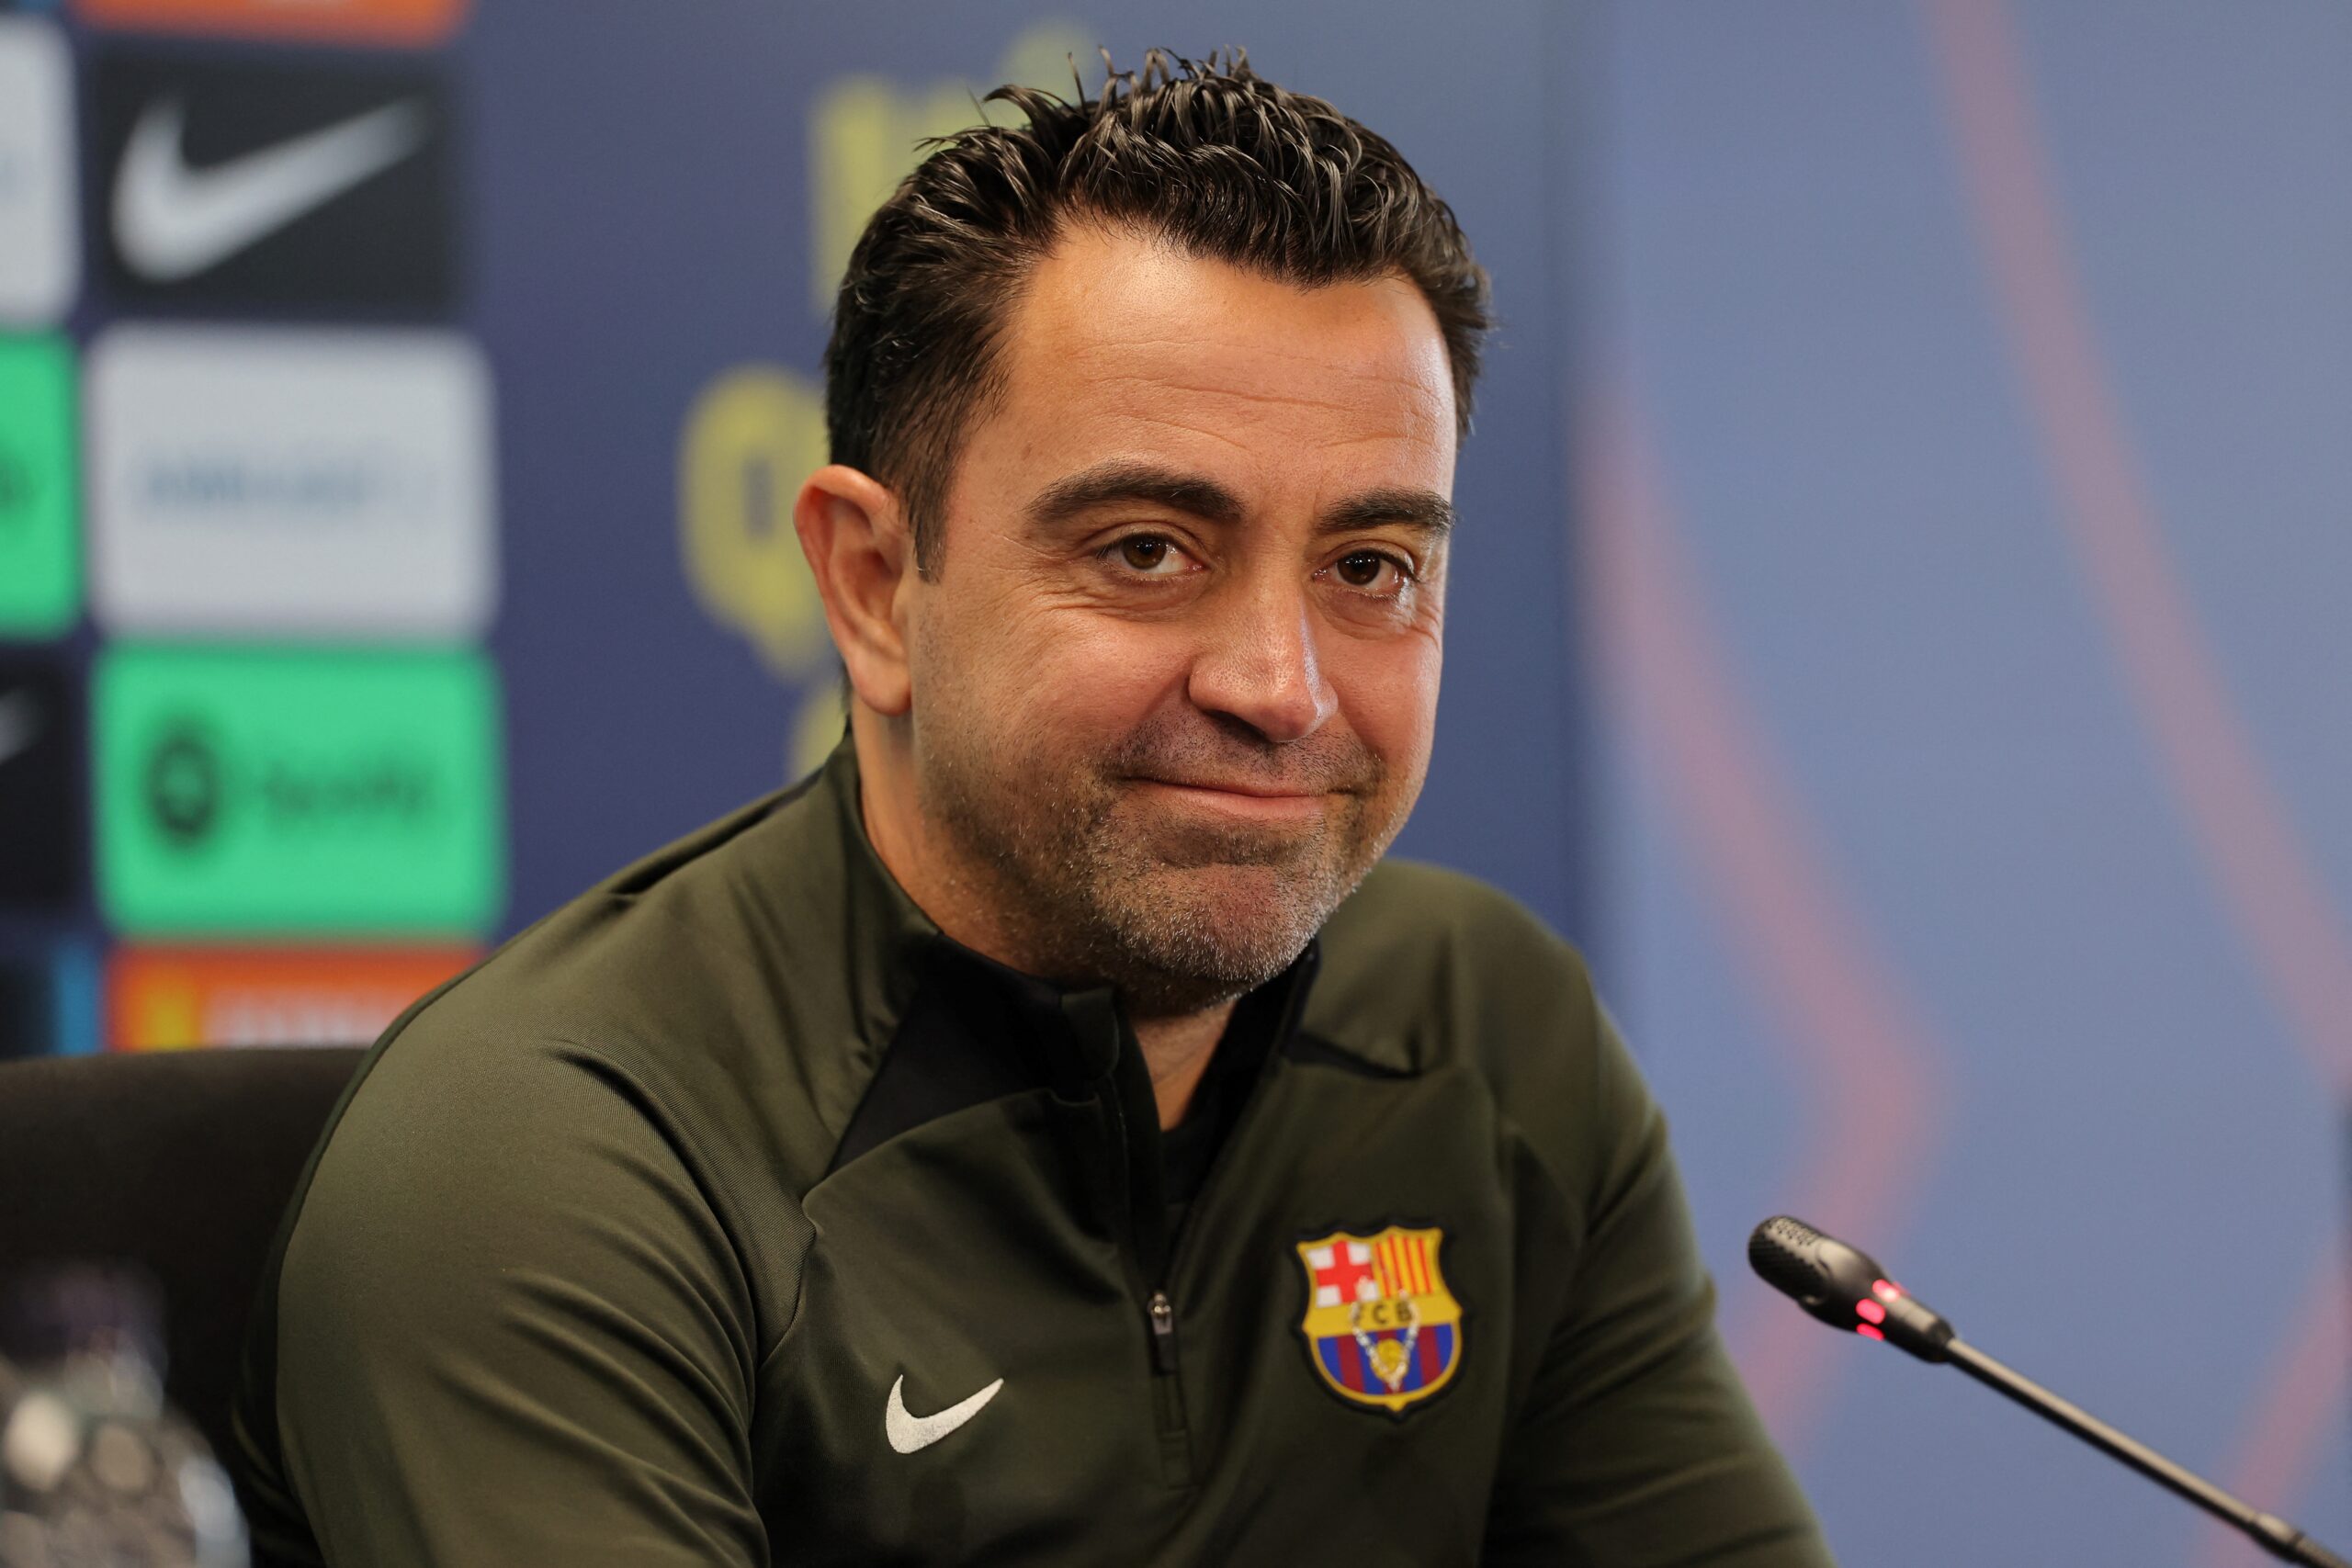 Barcelona's Spanish coach Xavi addresses a press conference at the Joan Gamper training ground in Sant Joan Despi, near Barcelona, on April 25, 2024. Xavi will remain as coach of Barcelona, the Spanish giants told AFP on April 24, despite having announced in January that he planned to quit at the end of the season due to the "cruel and unpleasant" nature of the job.